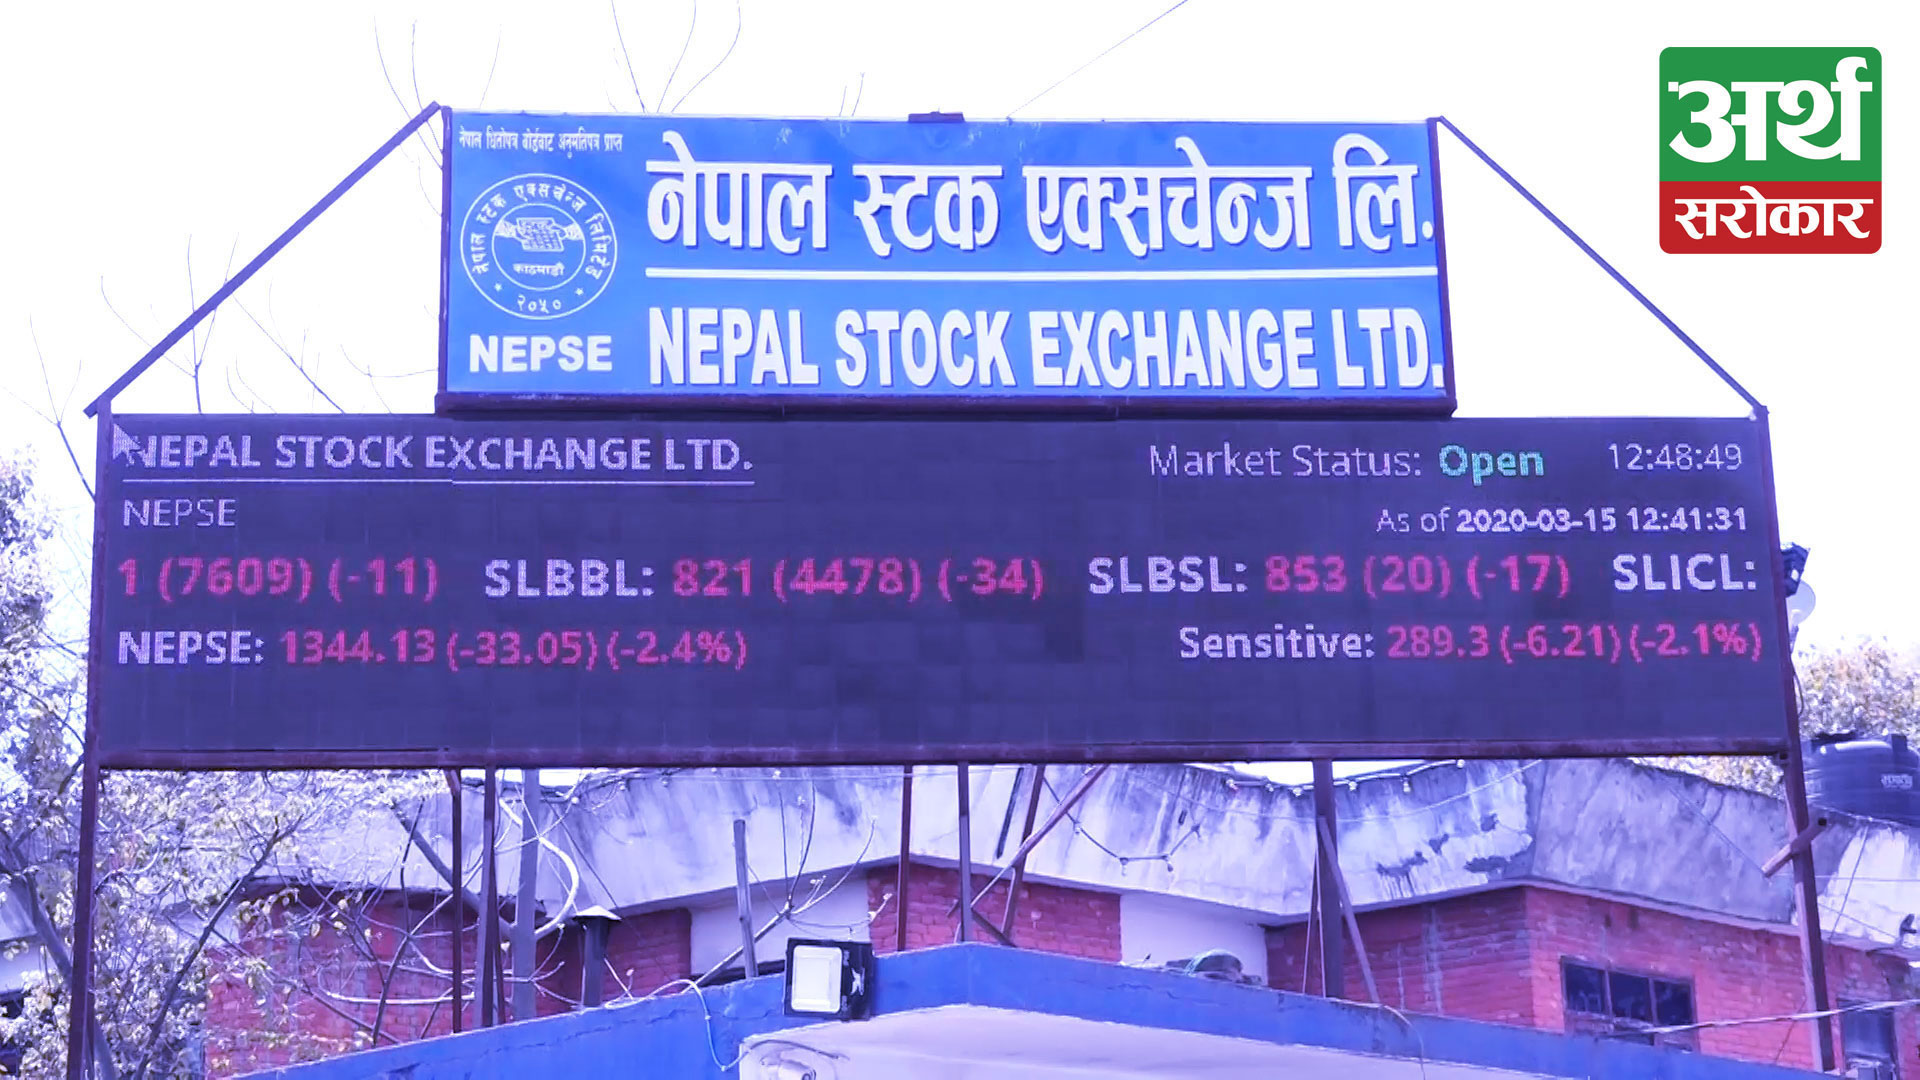 Nepse increased by 22 points, 55 companies  bought and sold 46,634 lots